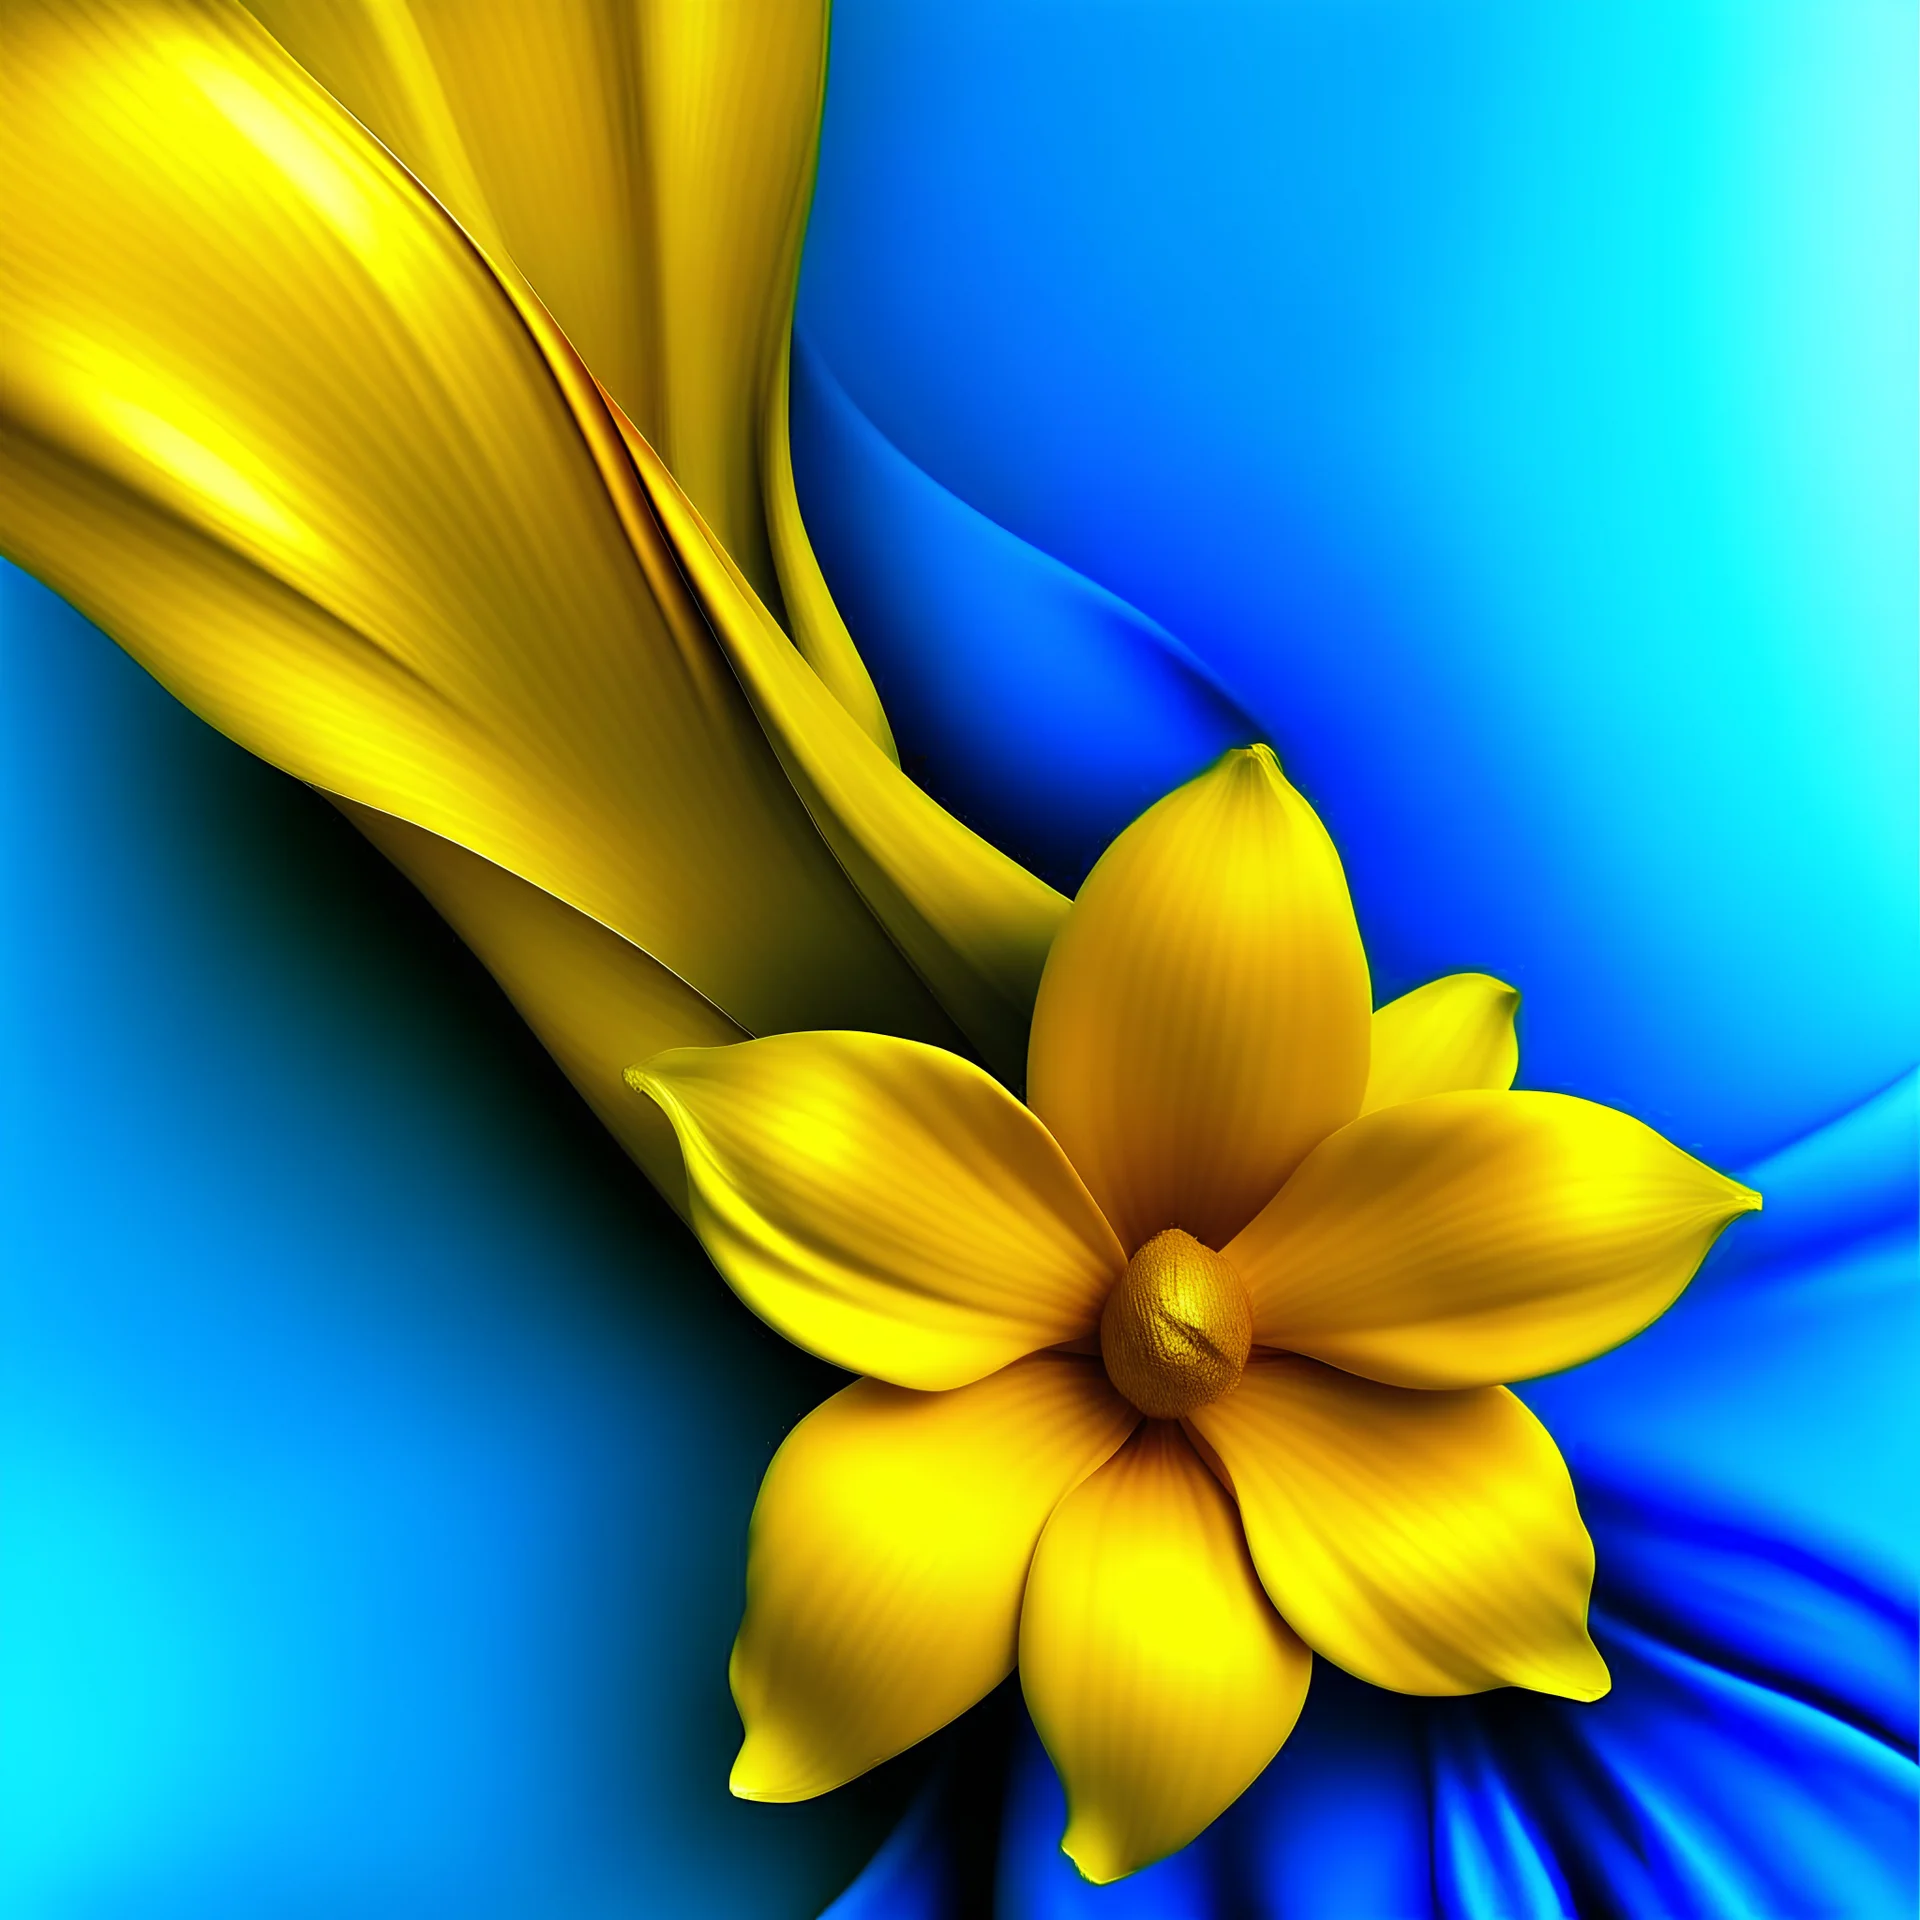 Create blue daffodil and gold background